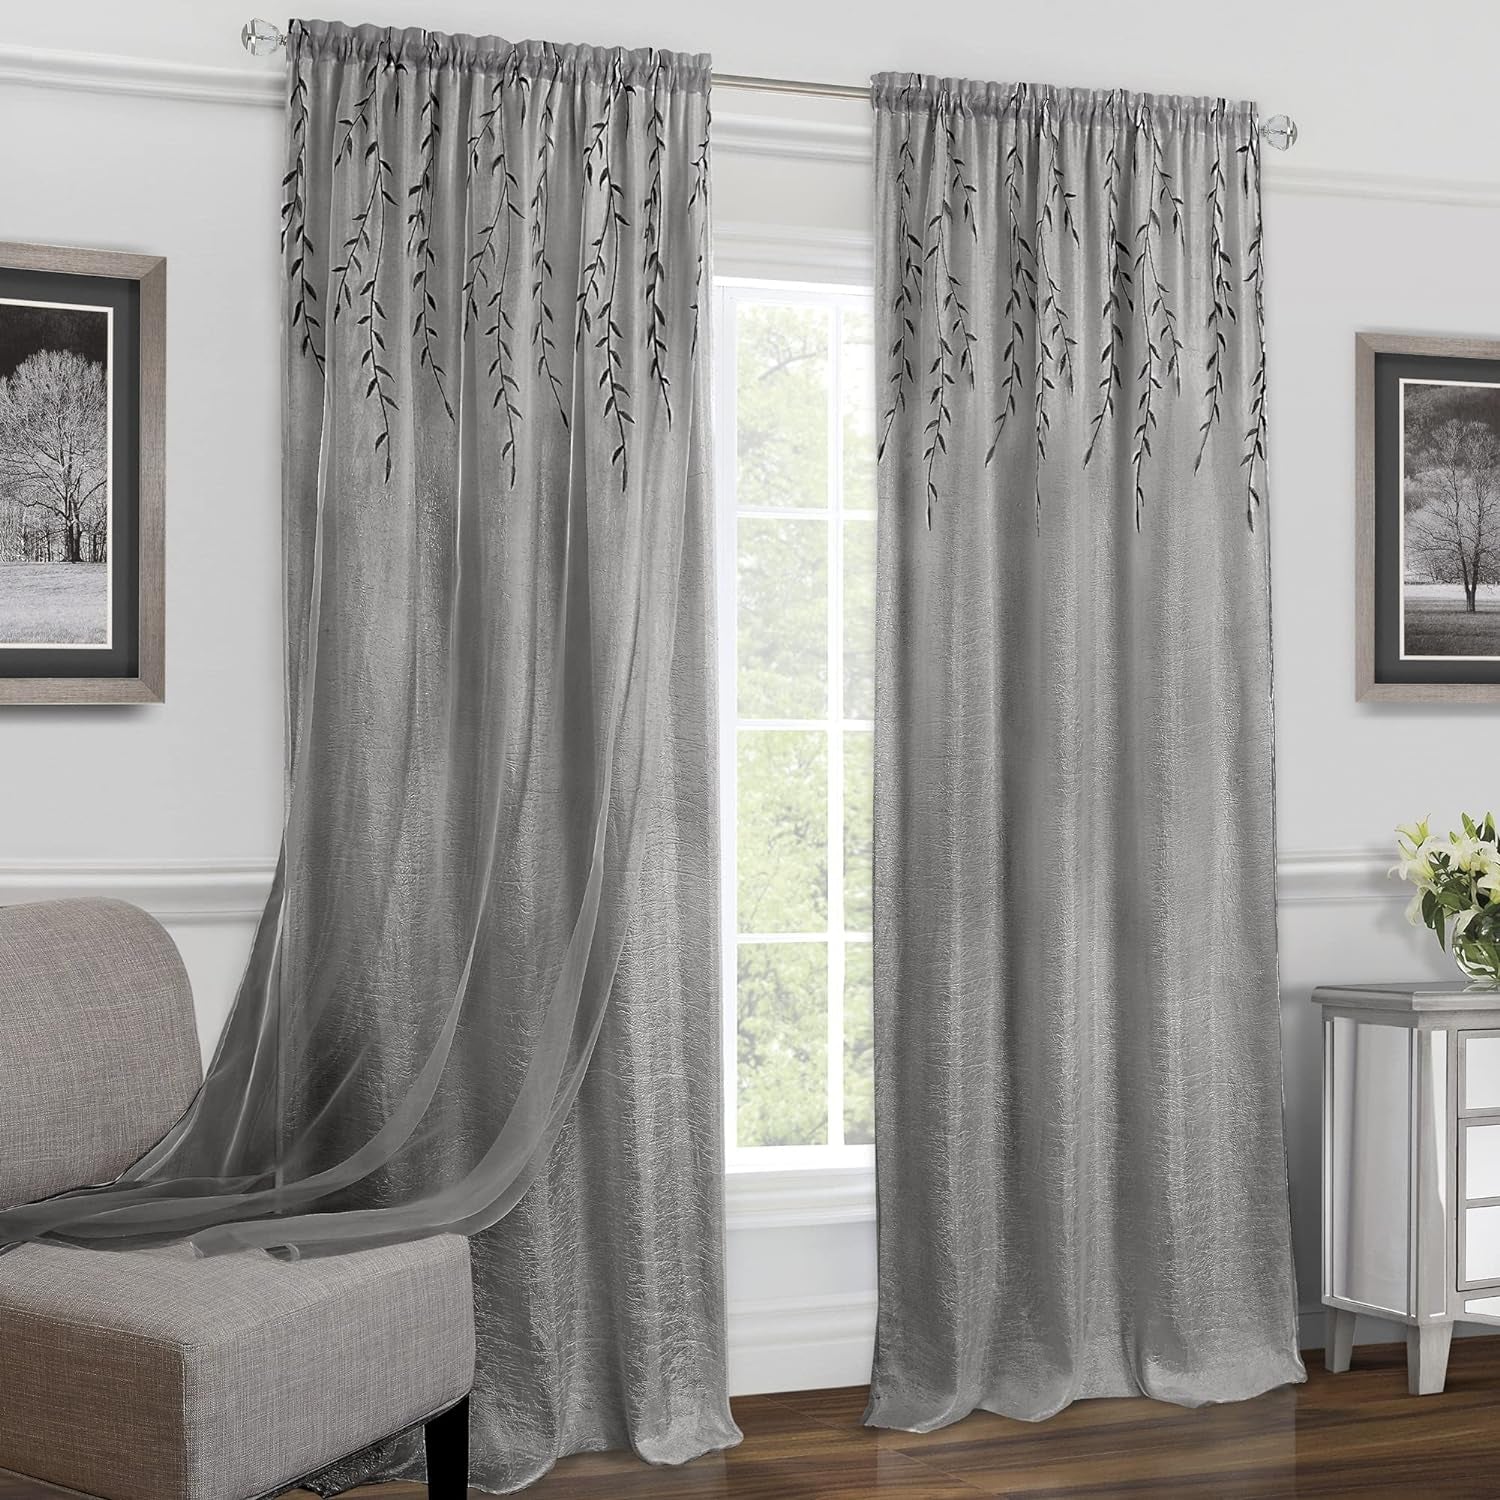 Light Filtering Rod Pocket Panel Window Curtain - 84 Inch Length, 42 Inch Width - Grey - Room Darkening & Machine Washable Soft Polyester Drapes for Bedroom Living & Dining Room by Achim Home Decor  Achim Home Furnishings Grey 42X84 